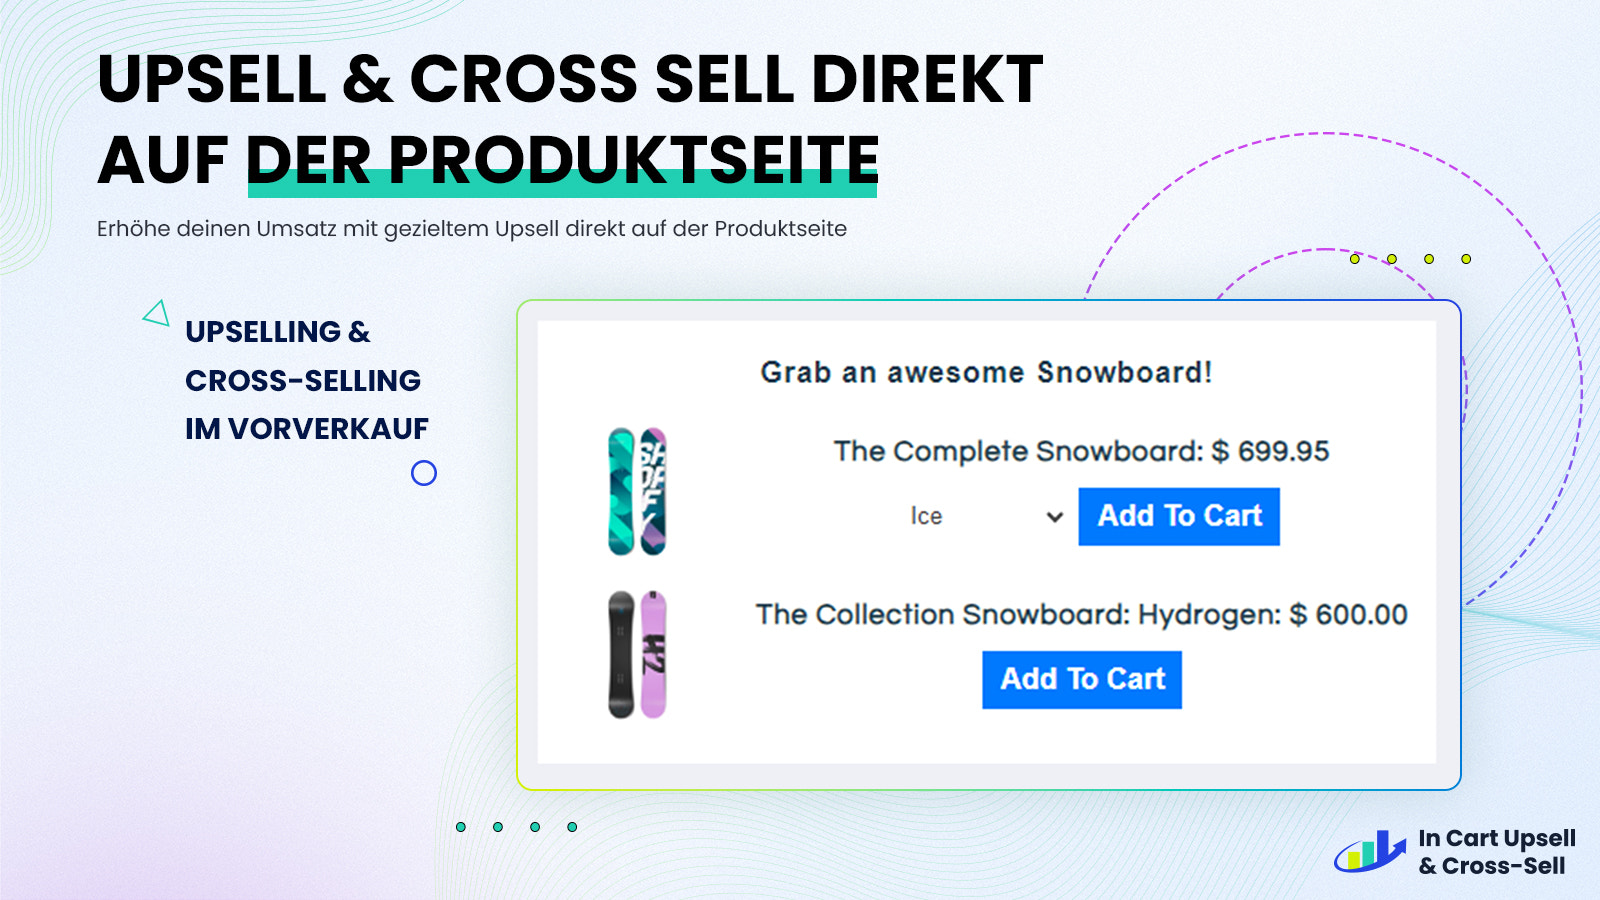 Offer upsells & cross sells on the product page